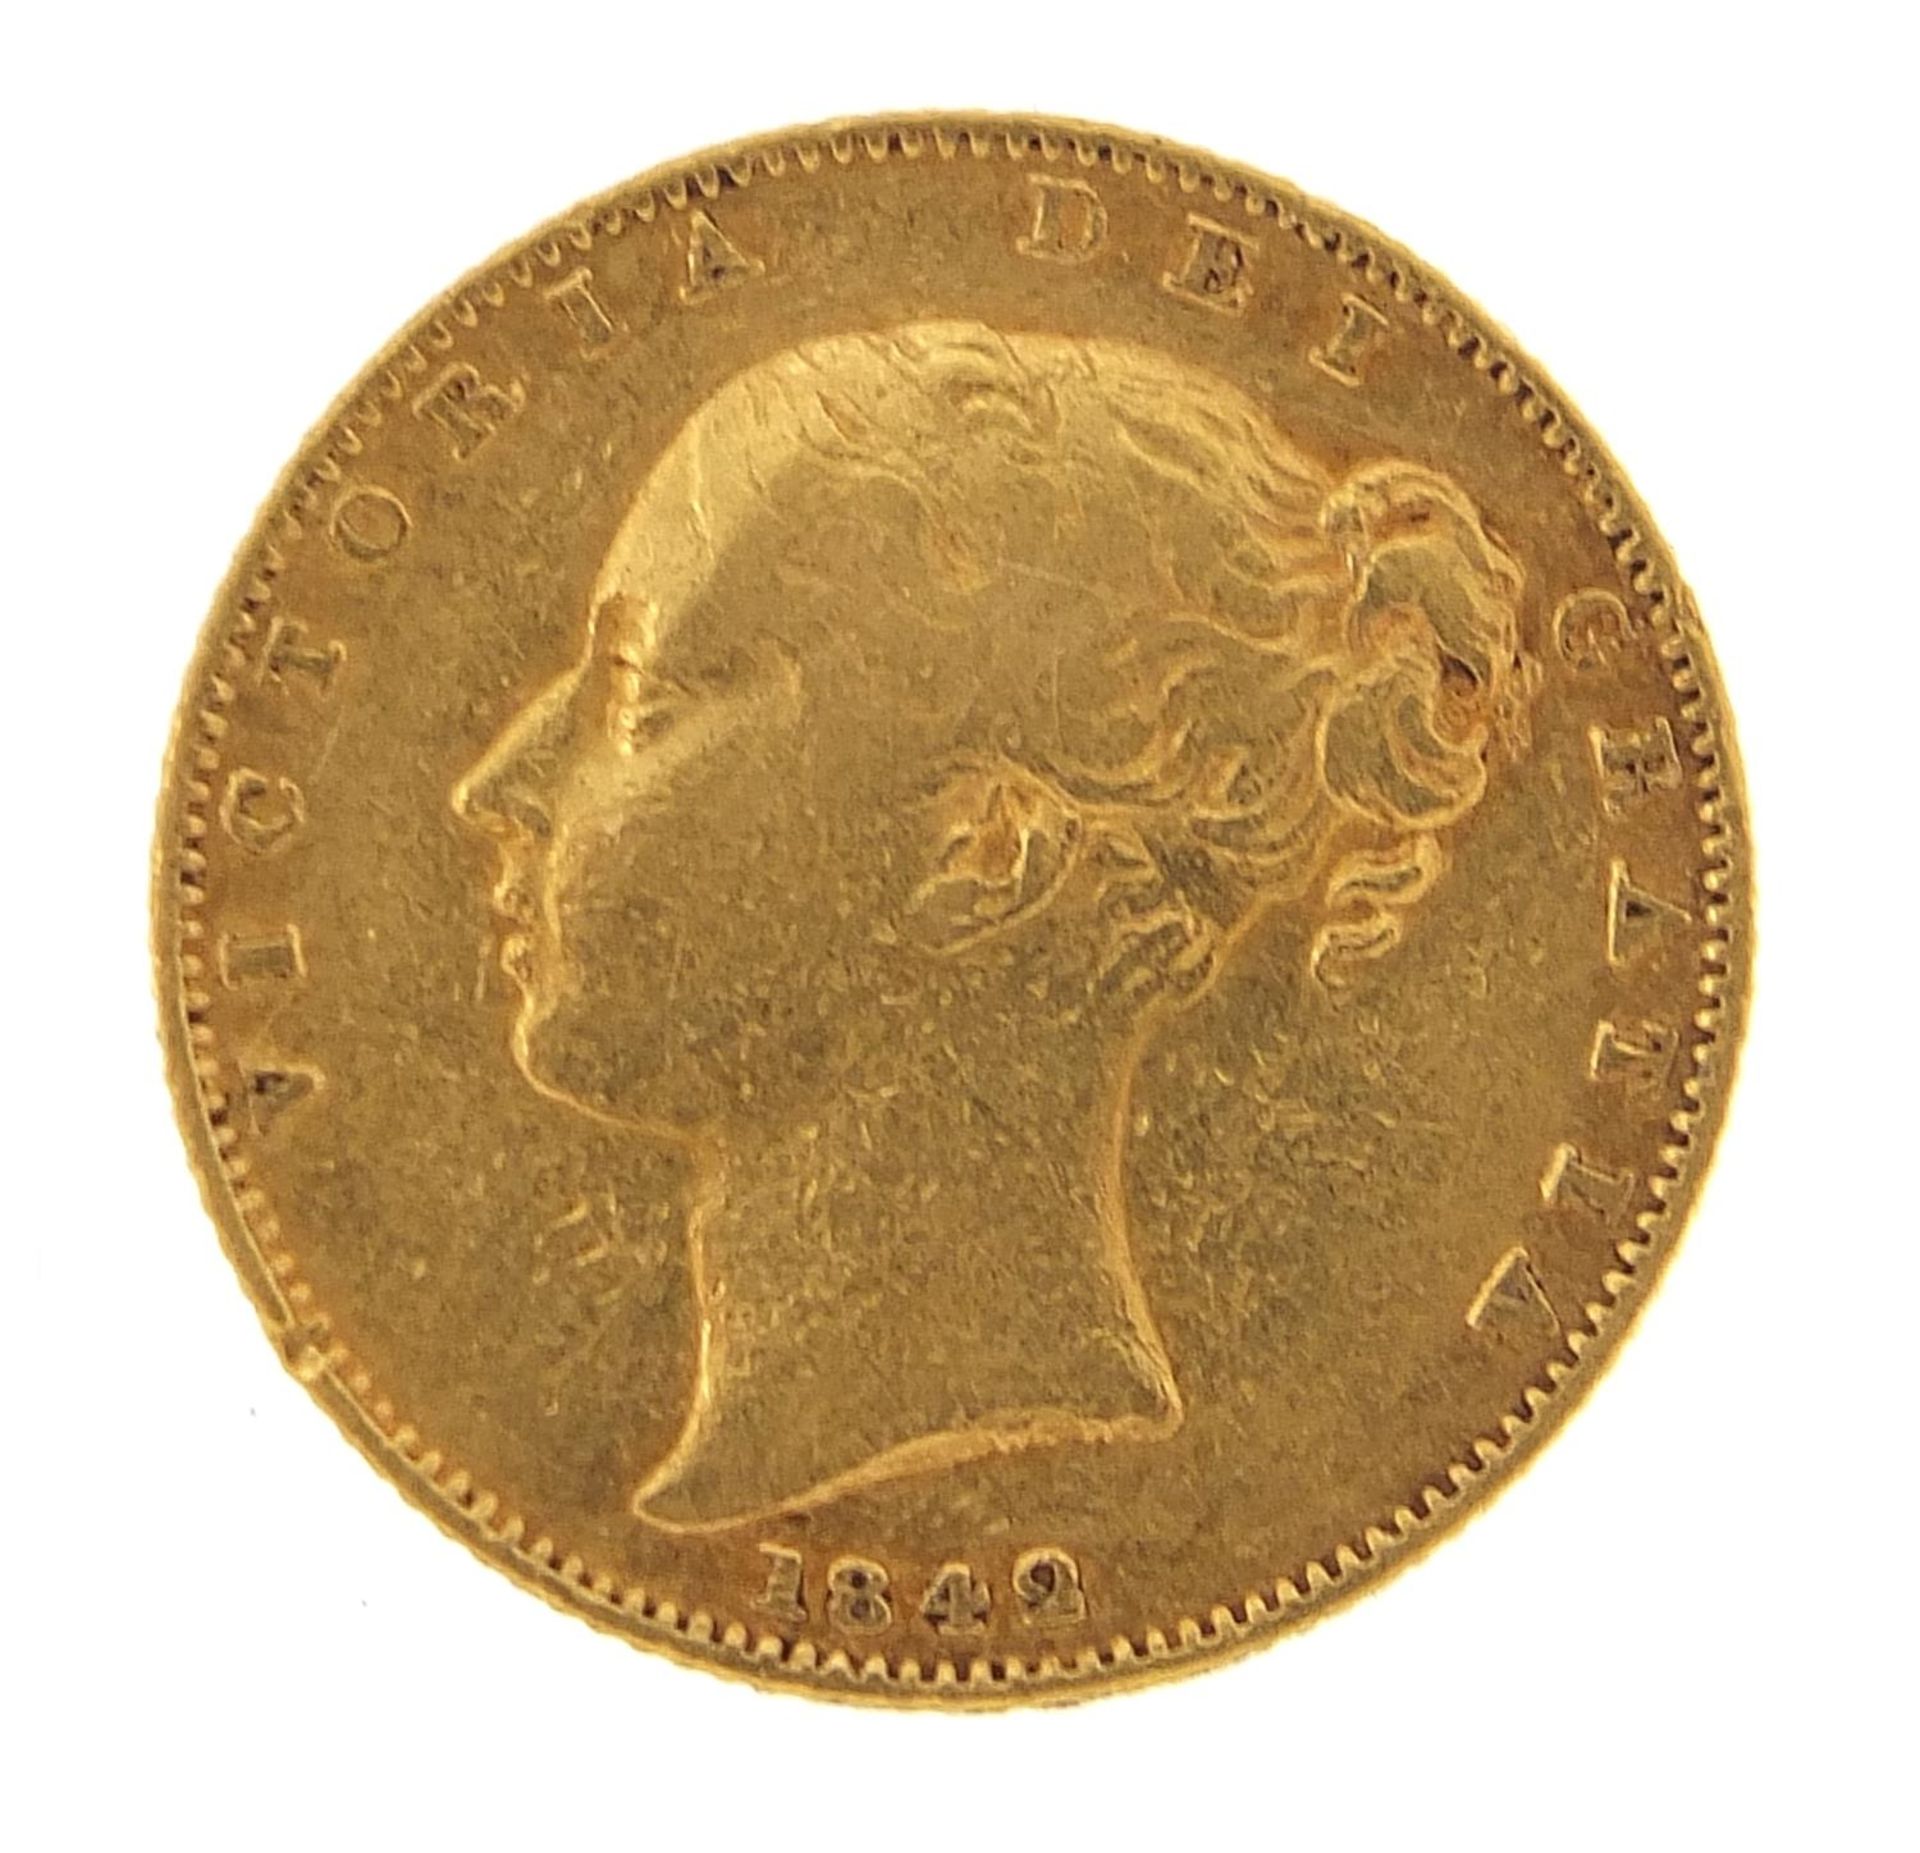 Queen Victoria Young Head 1842 shield back gold sovereign - this lot is sold without buyer's premium - Image 2 of 3